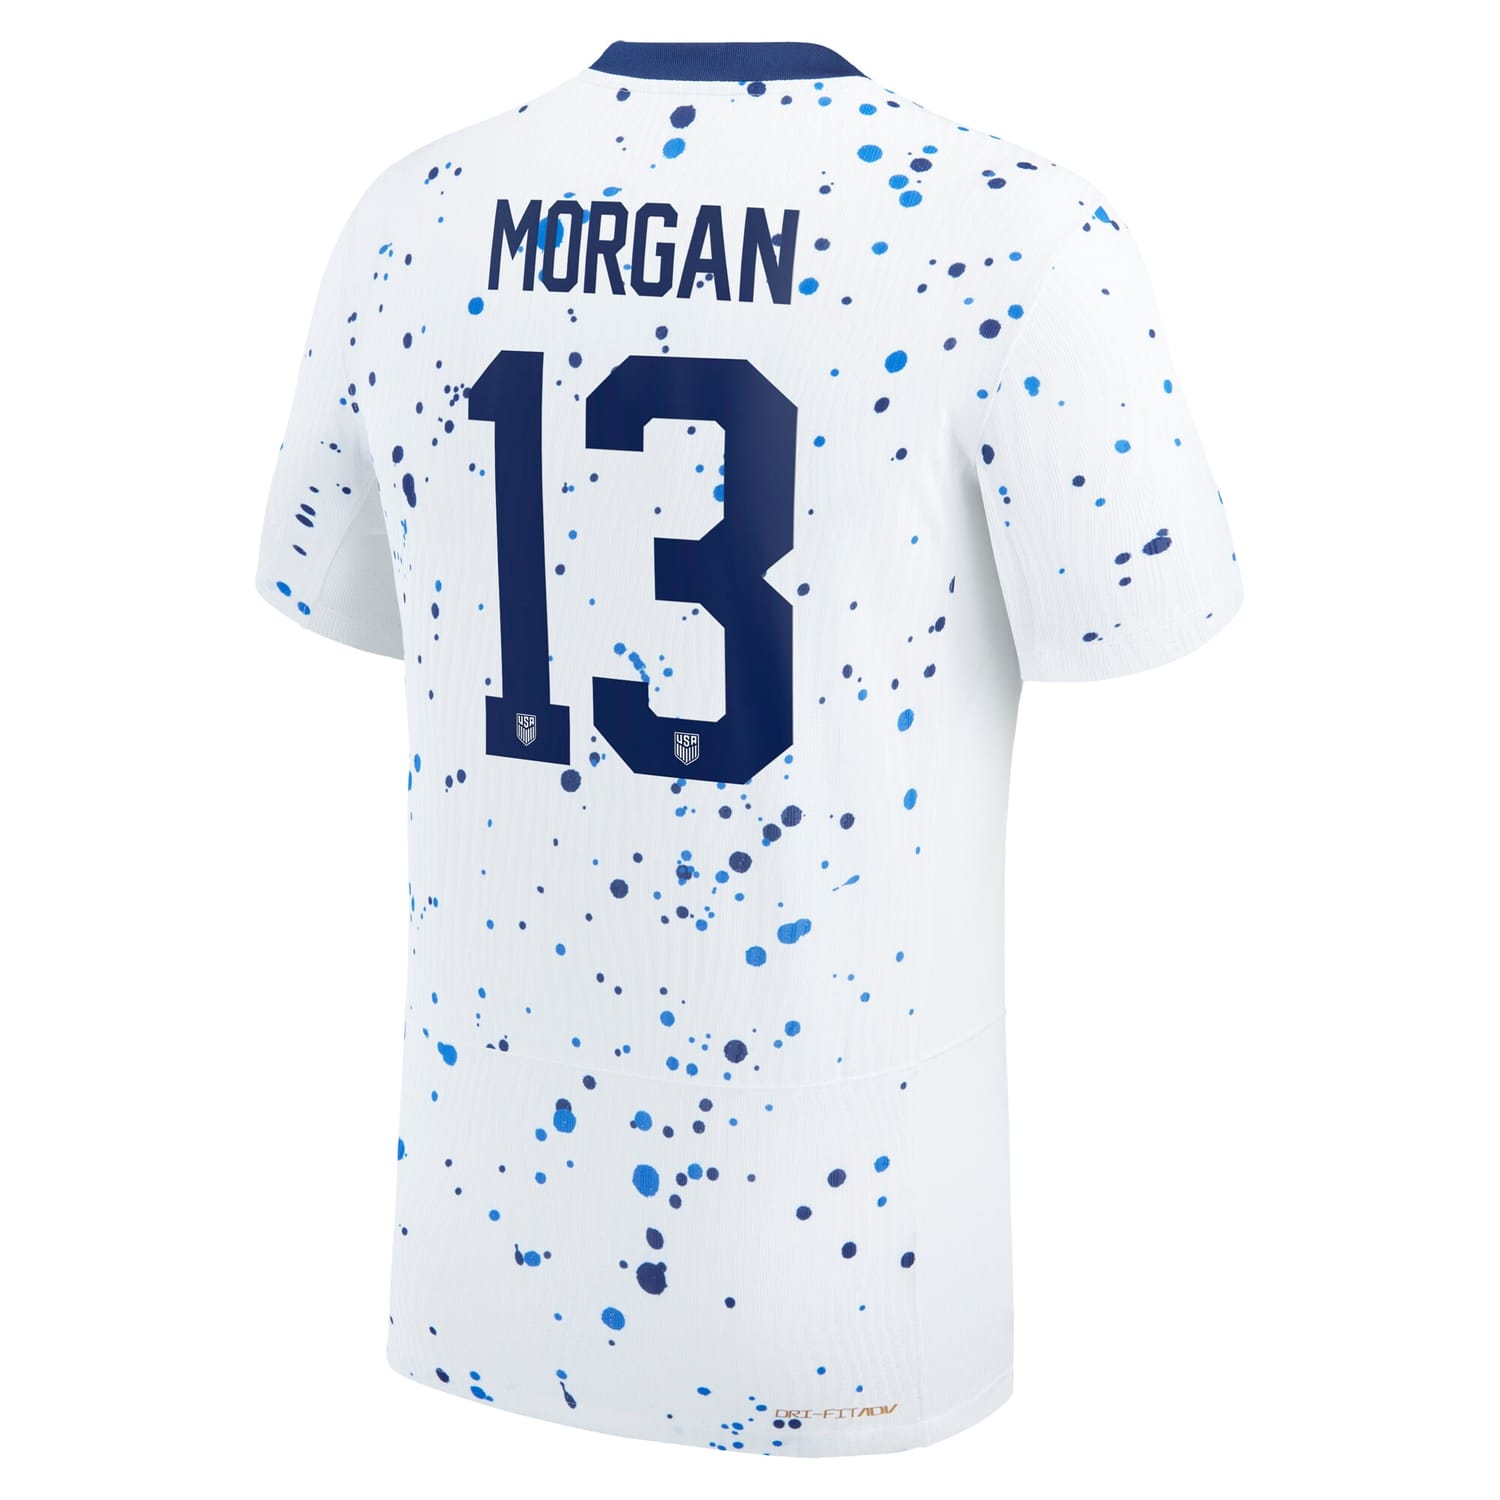 USWNT Home Authentic Jersey Shirt White 2023 player Alex Morgan printing for Women